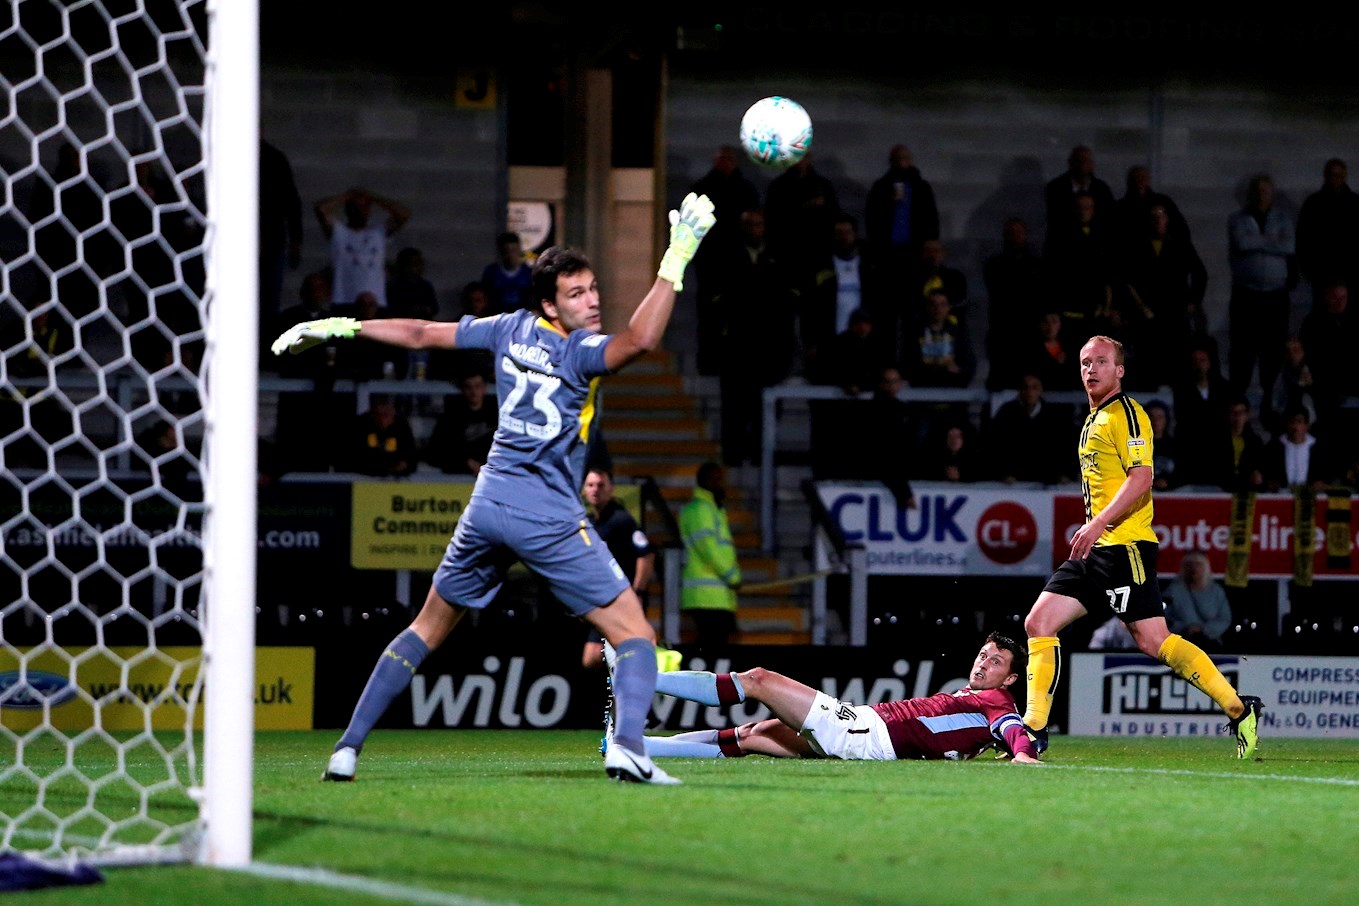 Liam Boyce scores the only goal of the game as Burton Albion defeat Championship side Aston Villa in the second round of the Carabao Cup at the Pirelli Stadium